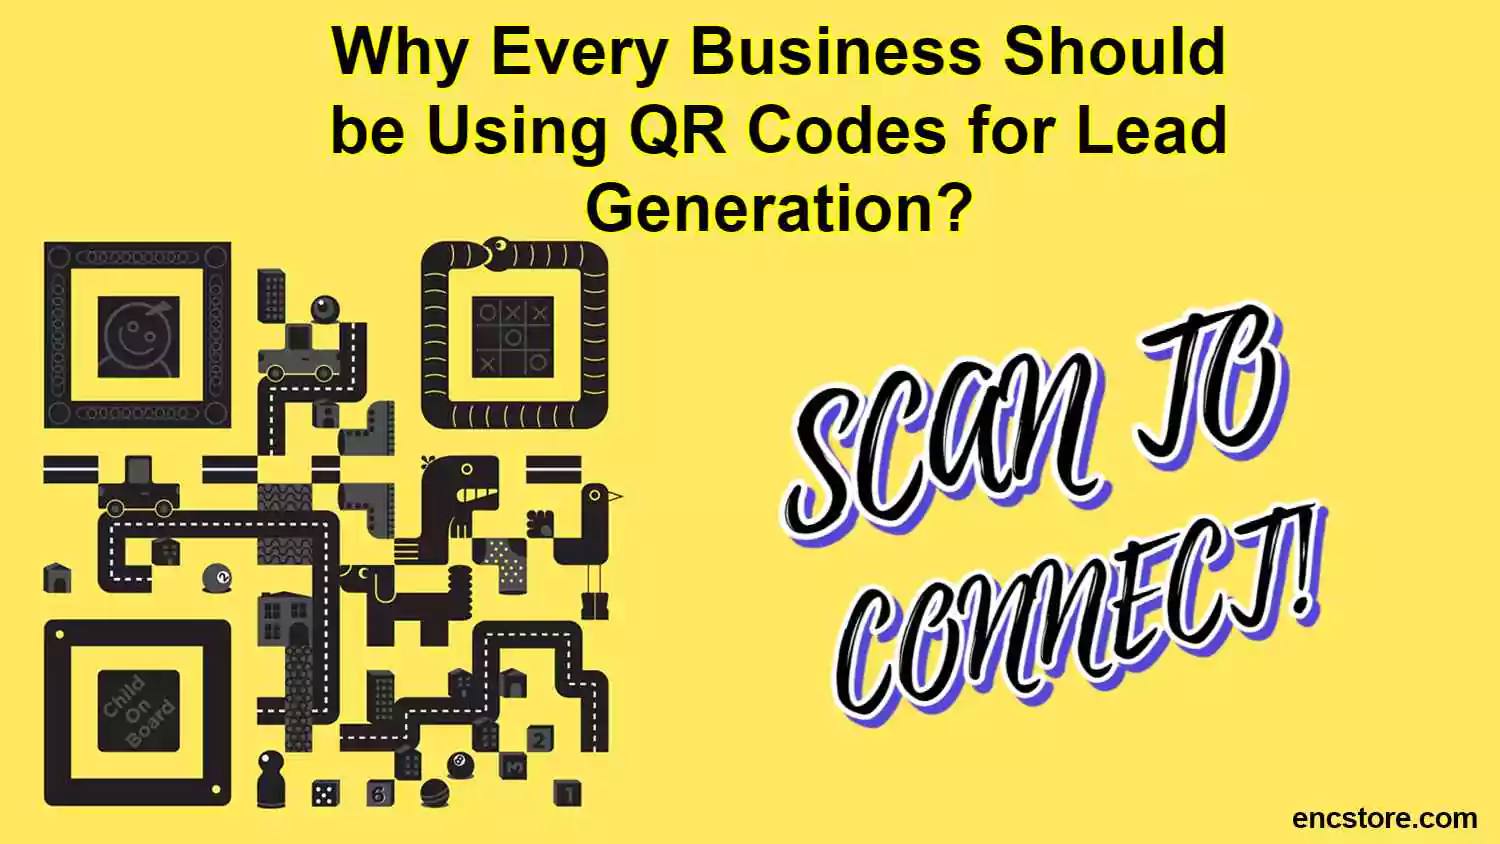 QR Codes for Lead Generation